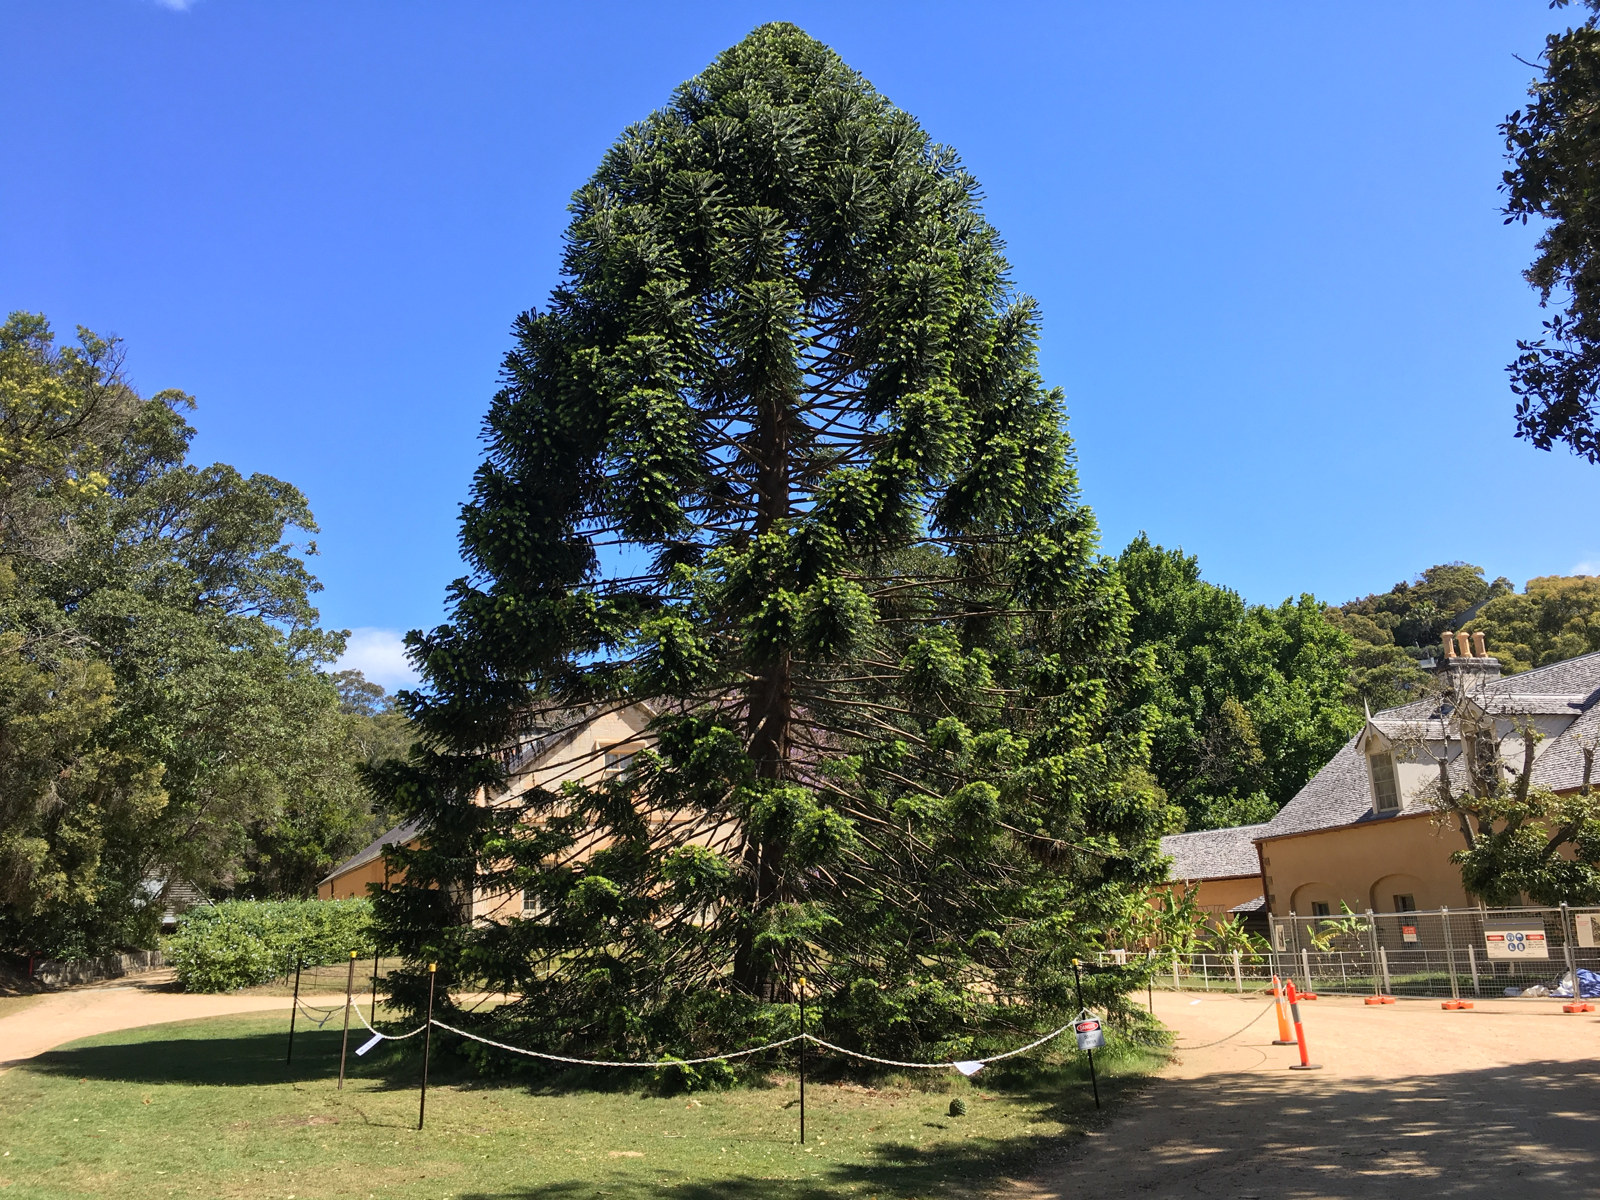 The Bunya Tree at Vaucluse house, showing the exclusion zone around the tree.